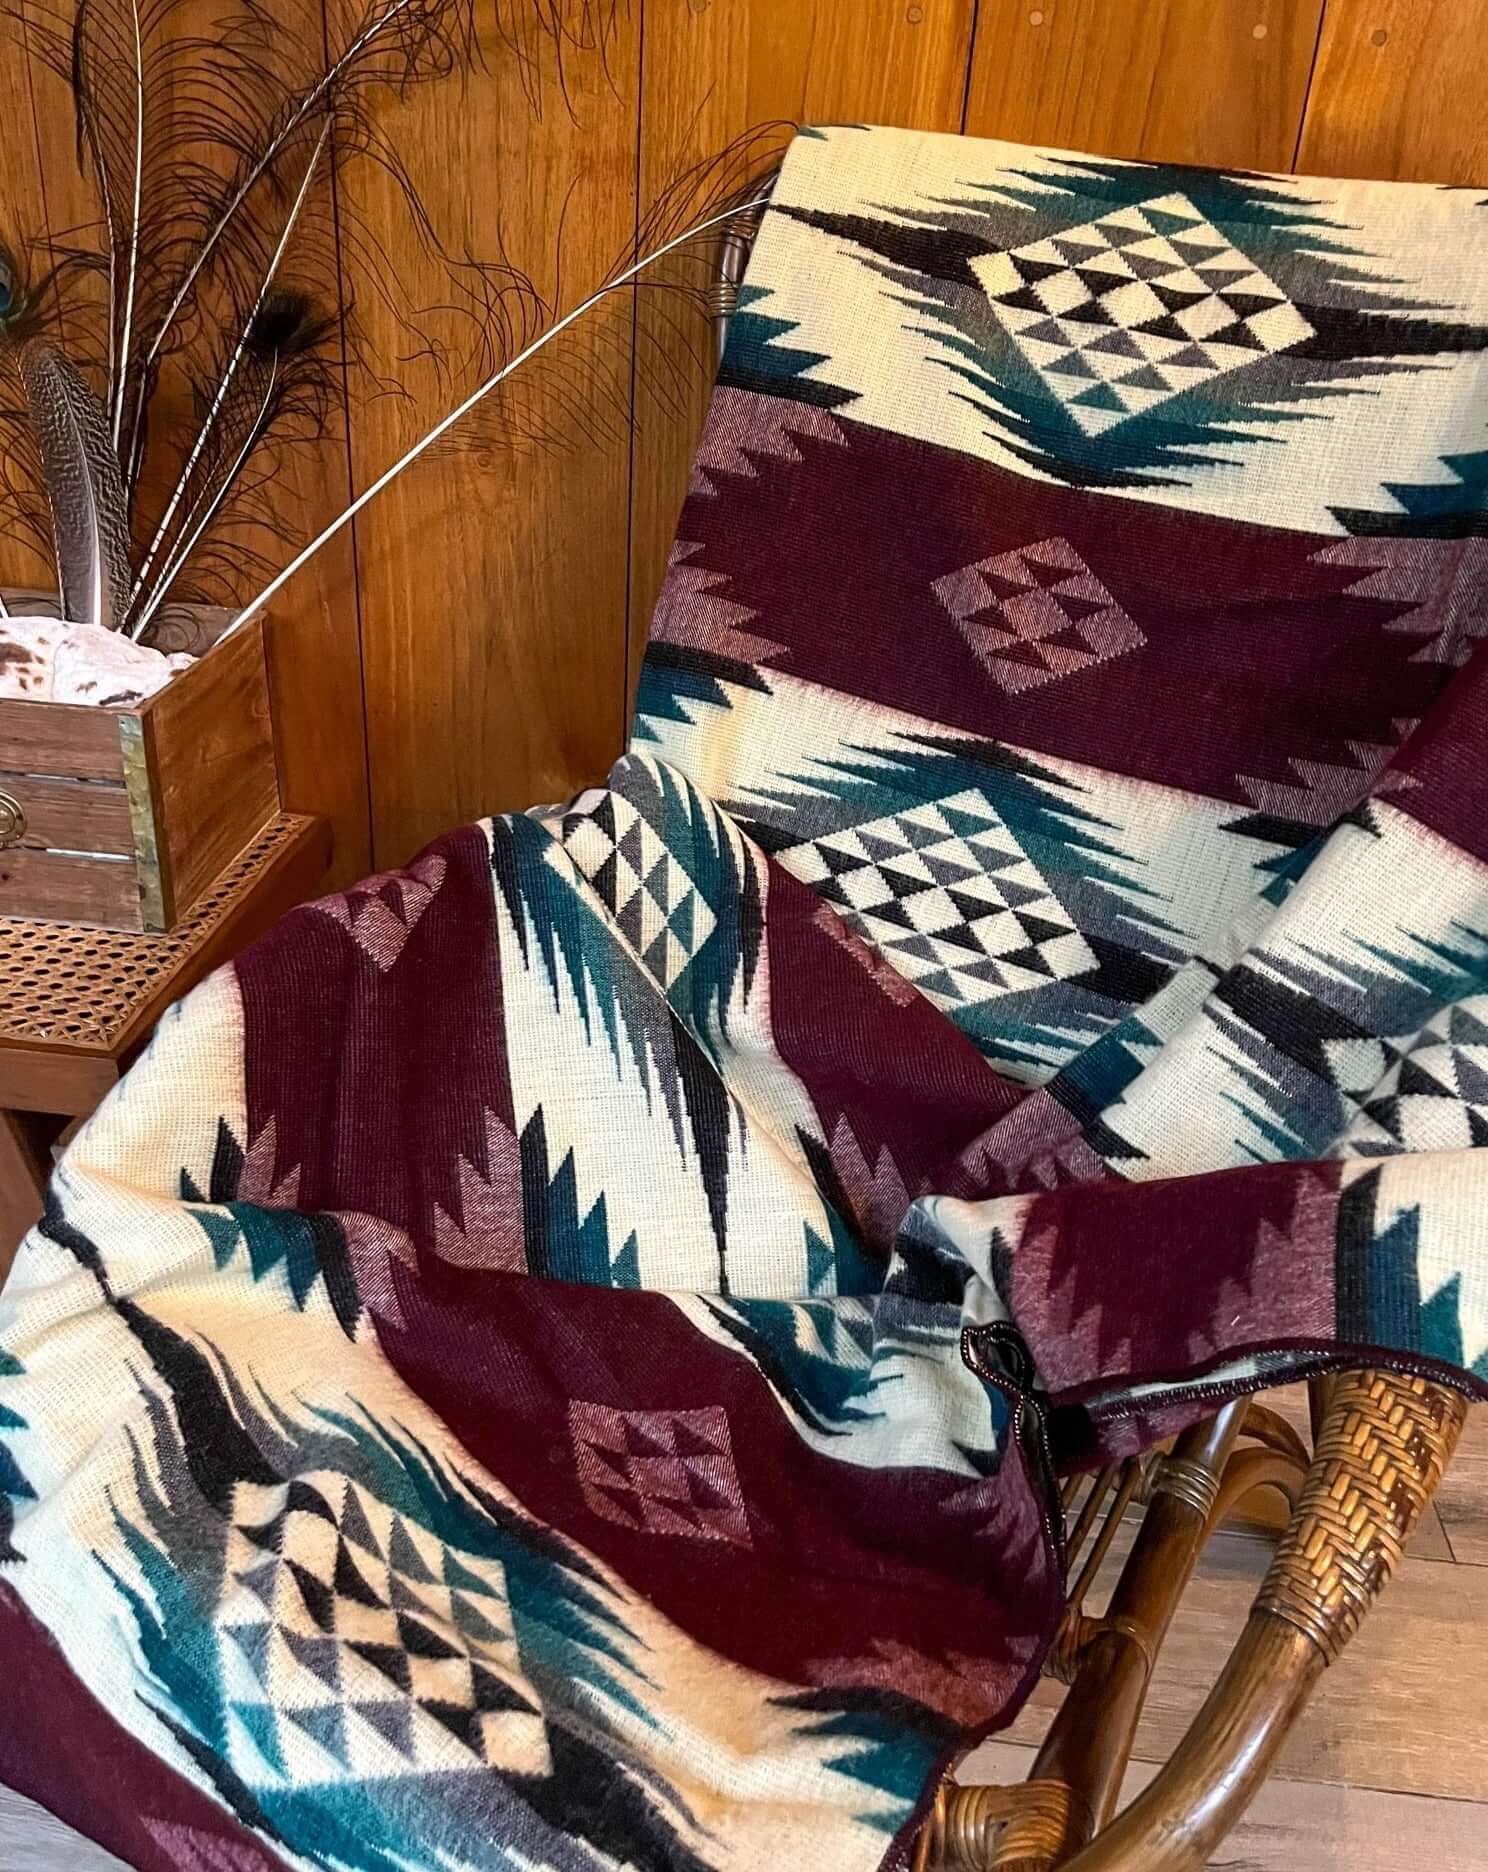 Andean Boho Blanket On Chair